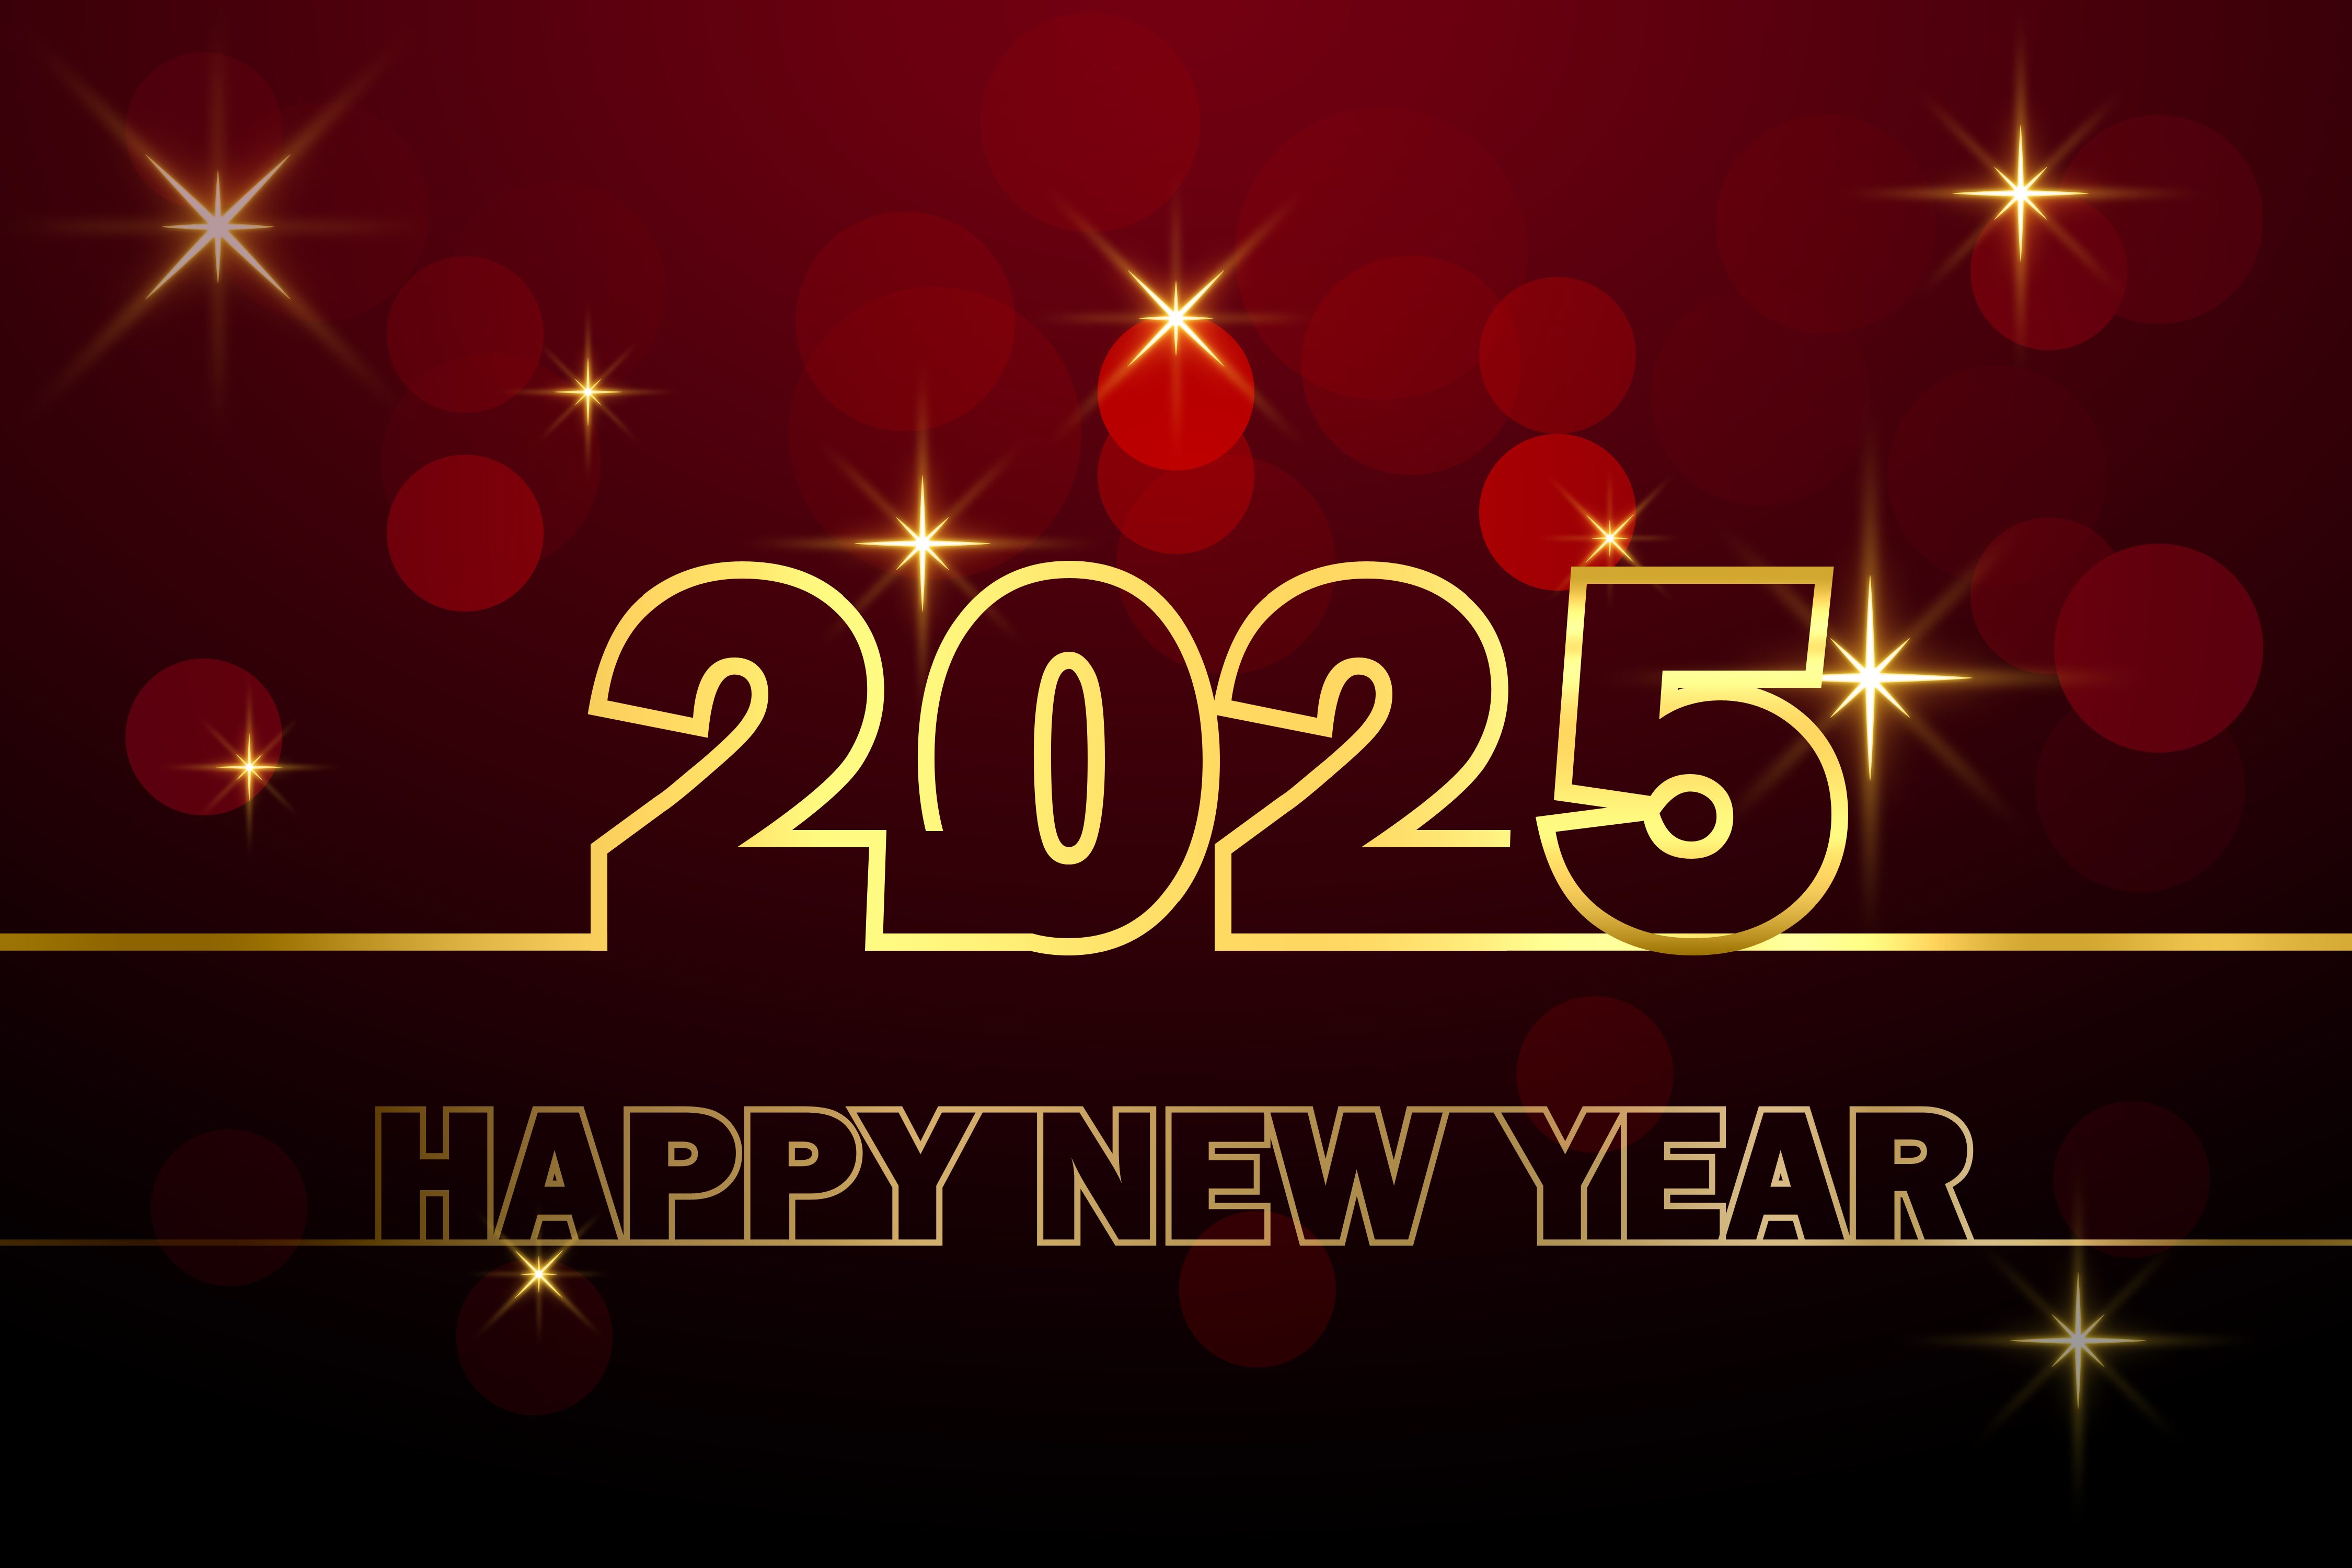 2025 Year New Year Holiday 4500x3000